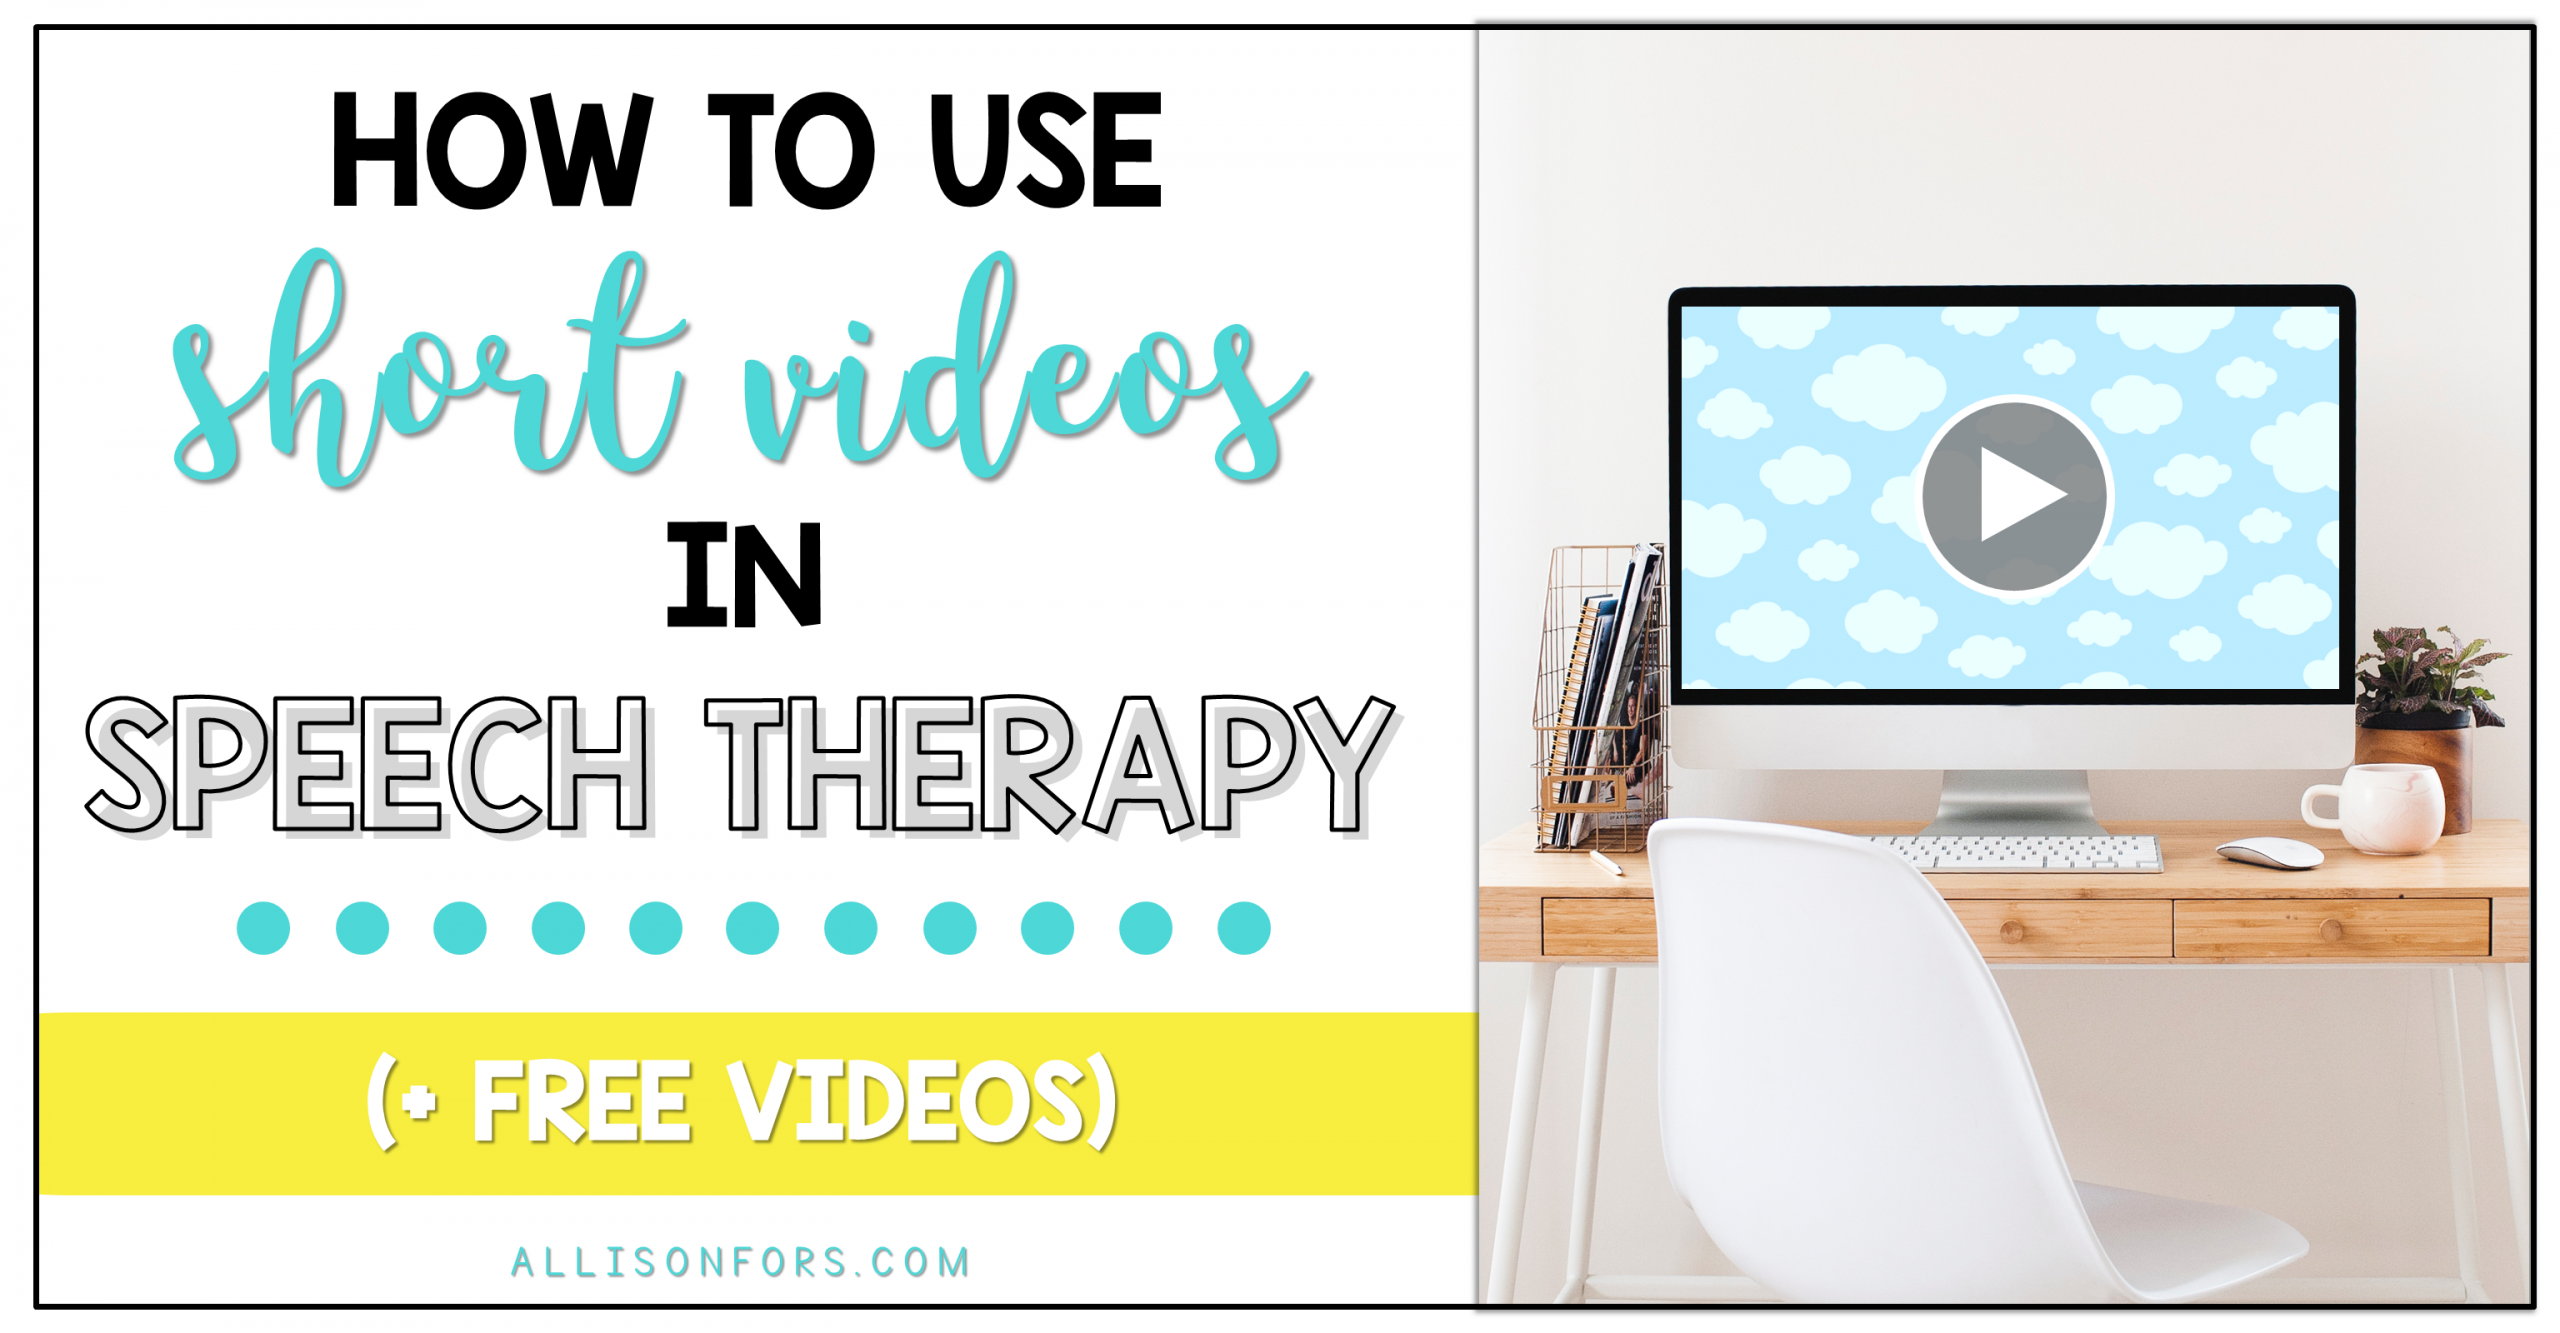 How to Use Short Videos in Speech Therapy (+ videos!)